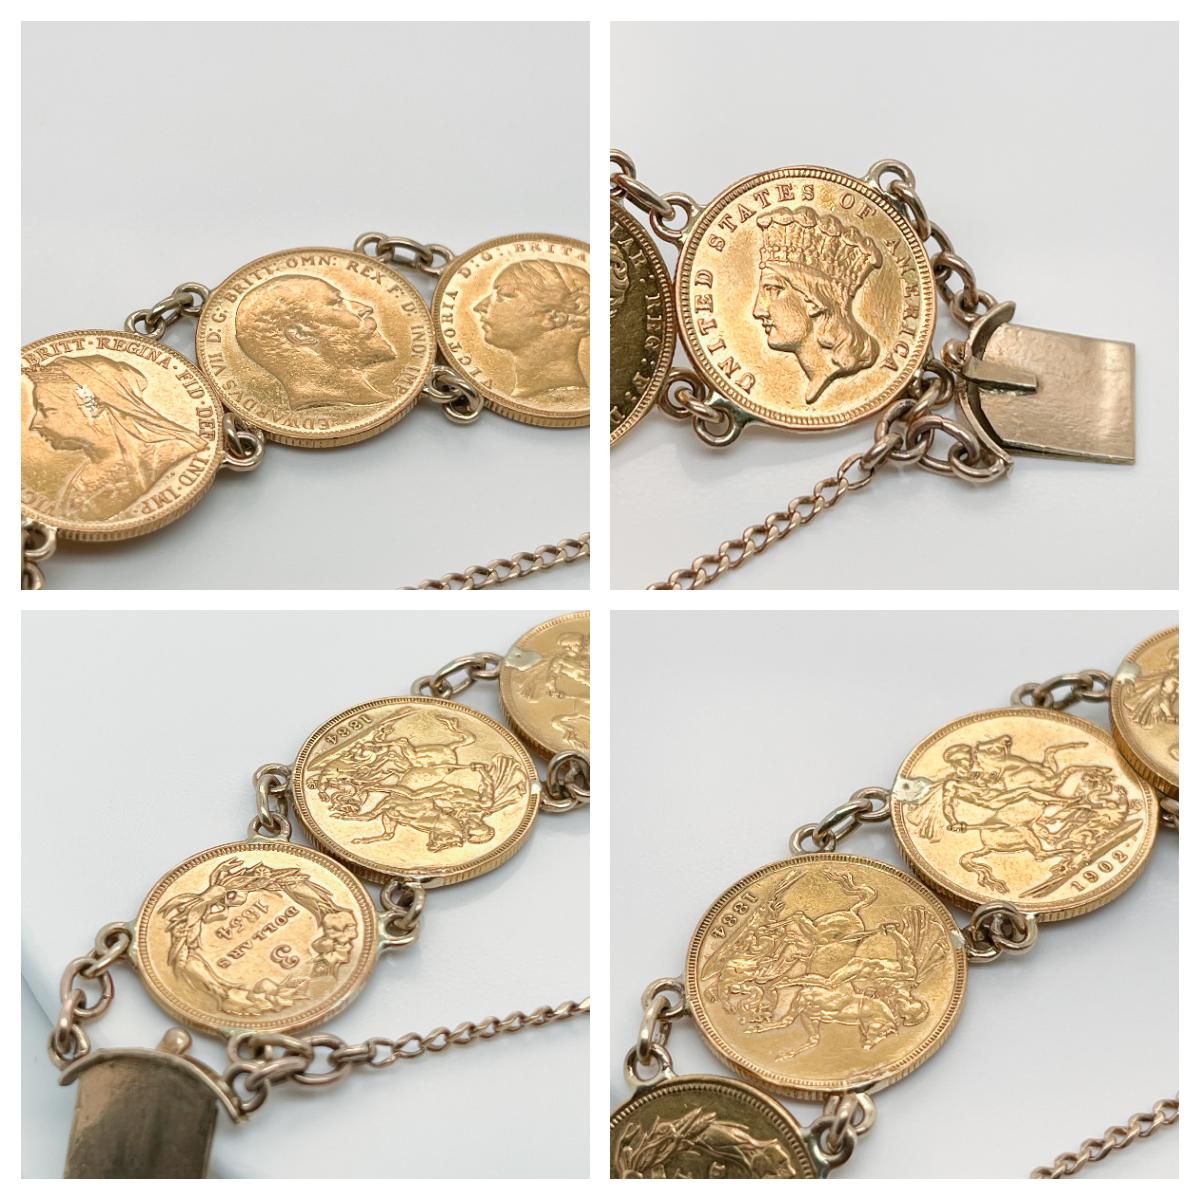 Antique Coin Bracelet with American Gold Coins & English Gold Sovereigns 2